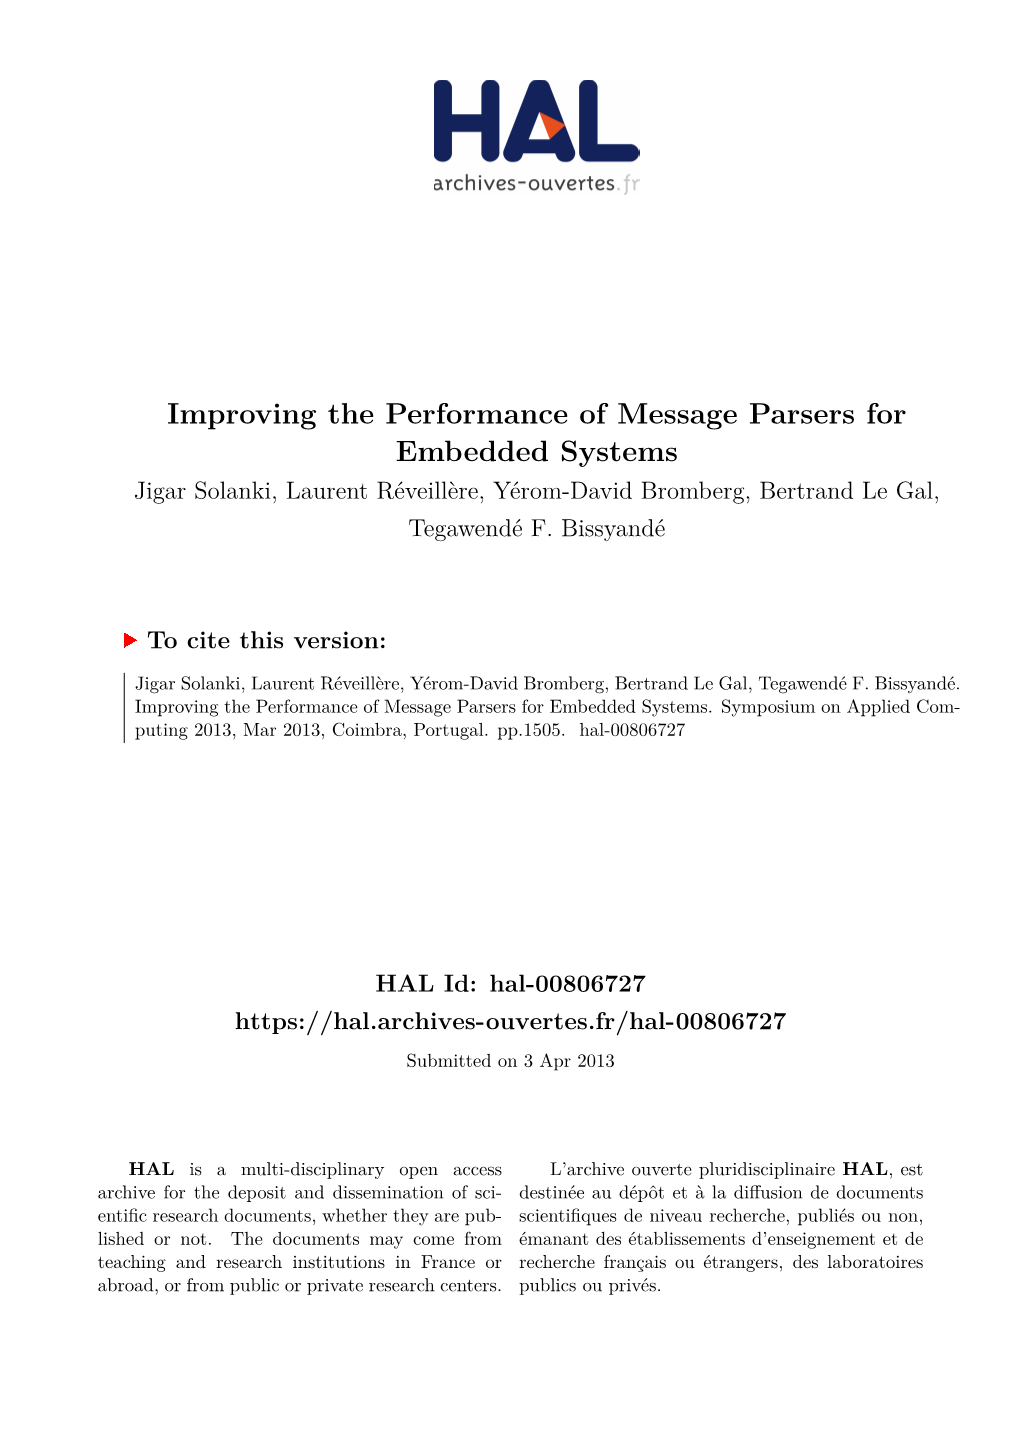 Improving the Performance of Message Parsers for Embedded Systems Jigar Solanki, Laurent Réveillère, Yérom-David Bromberg, Bertrand Le Gal, Tegawendé F